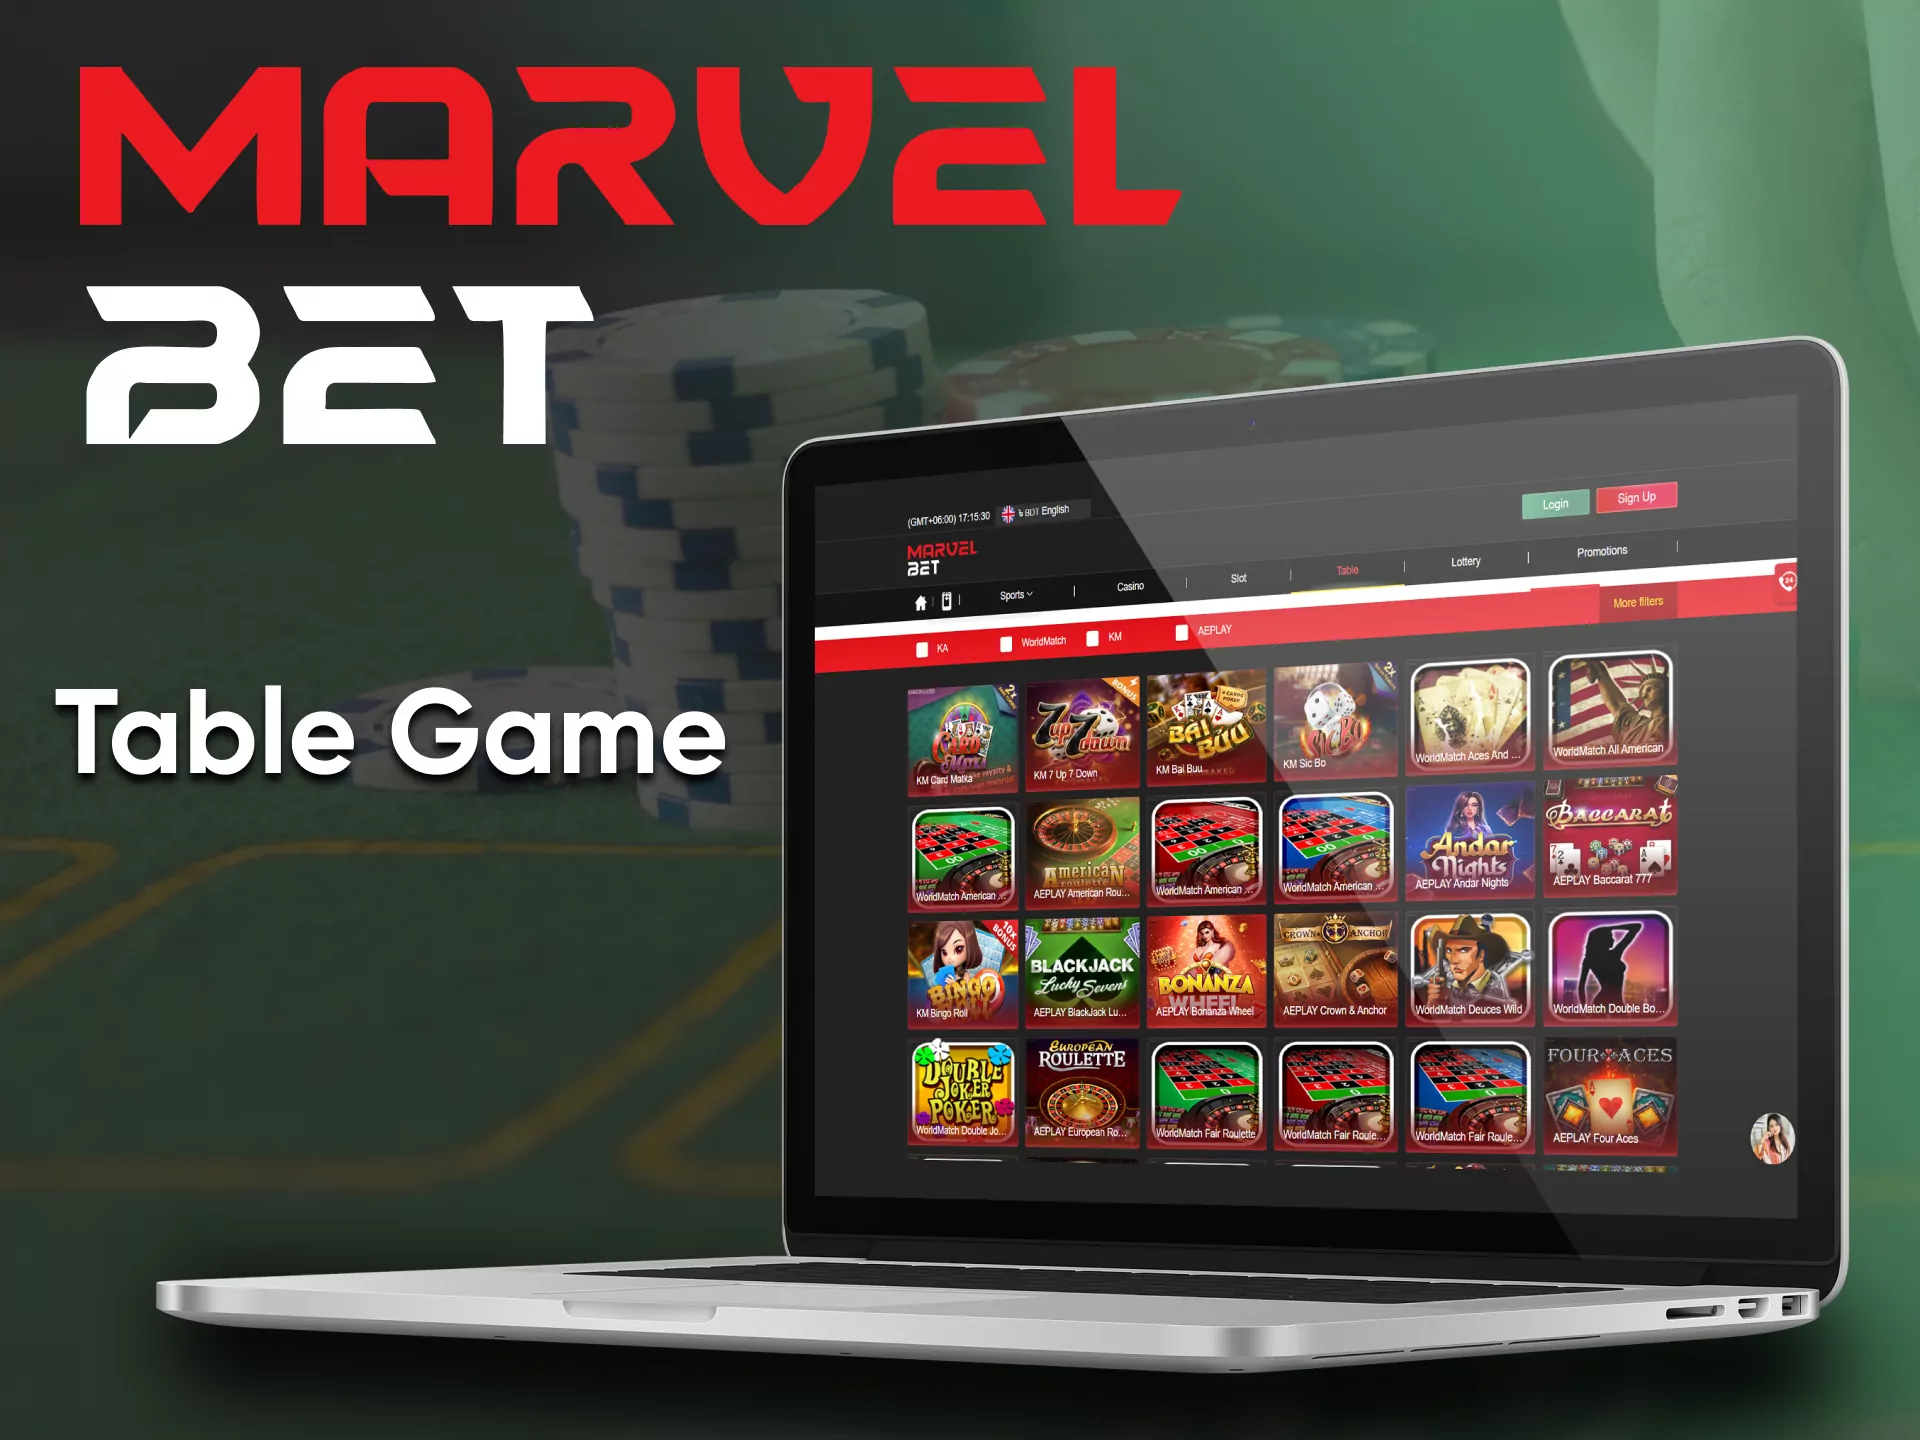 For Table games from Marvelet, go to the desired section.